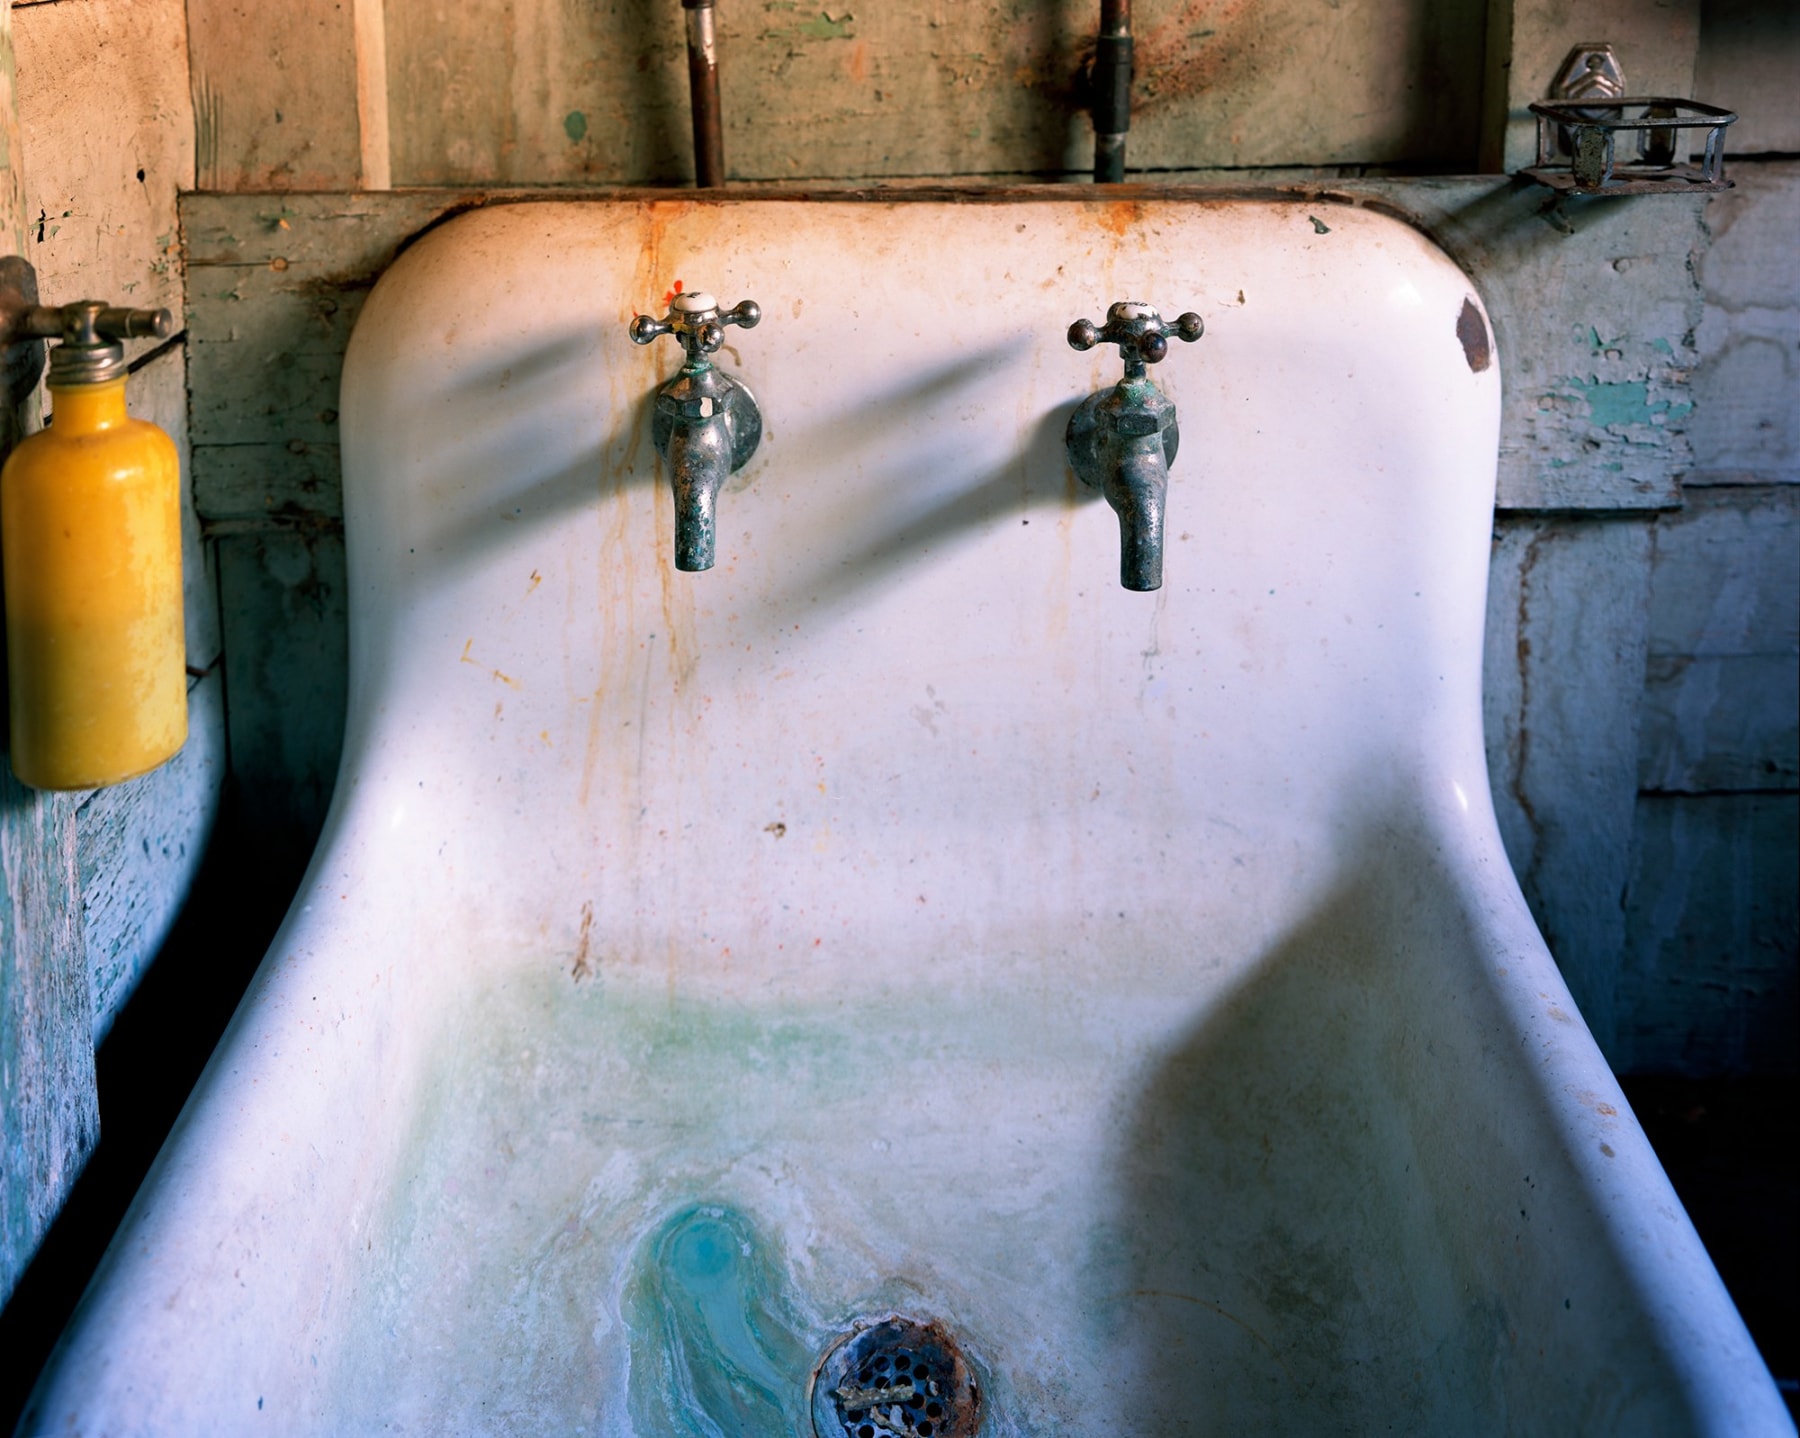 Photograph of old sink